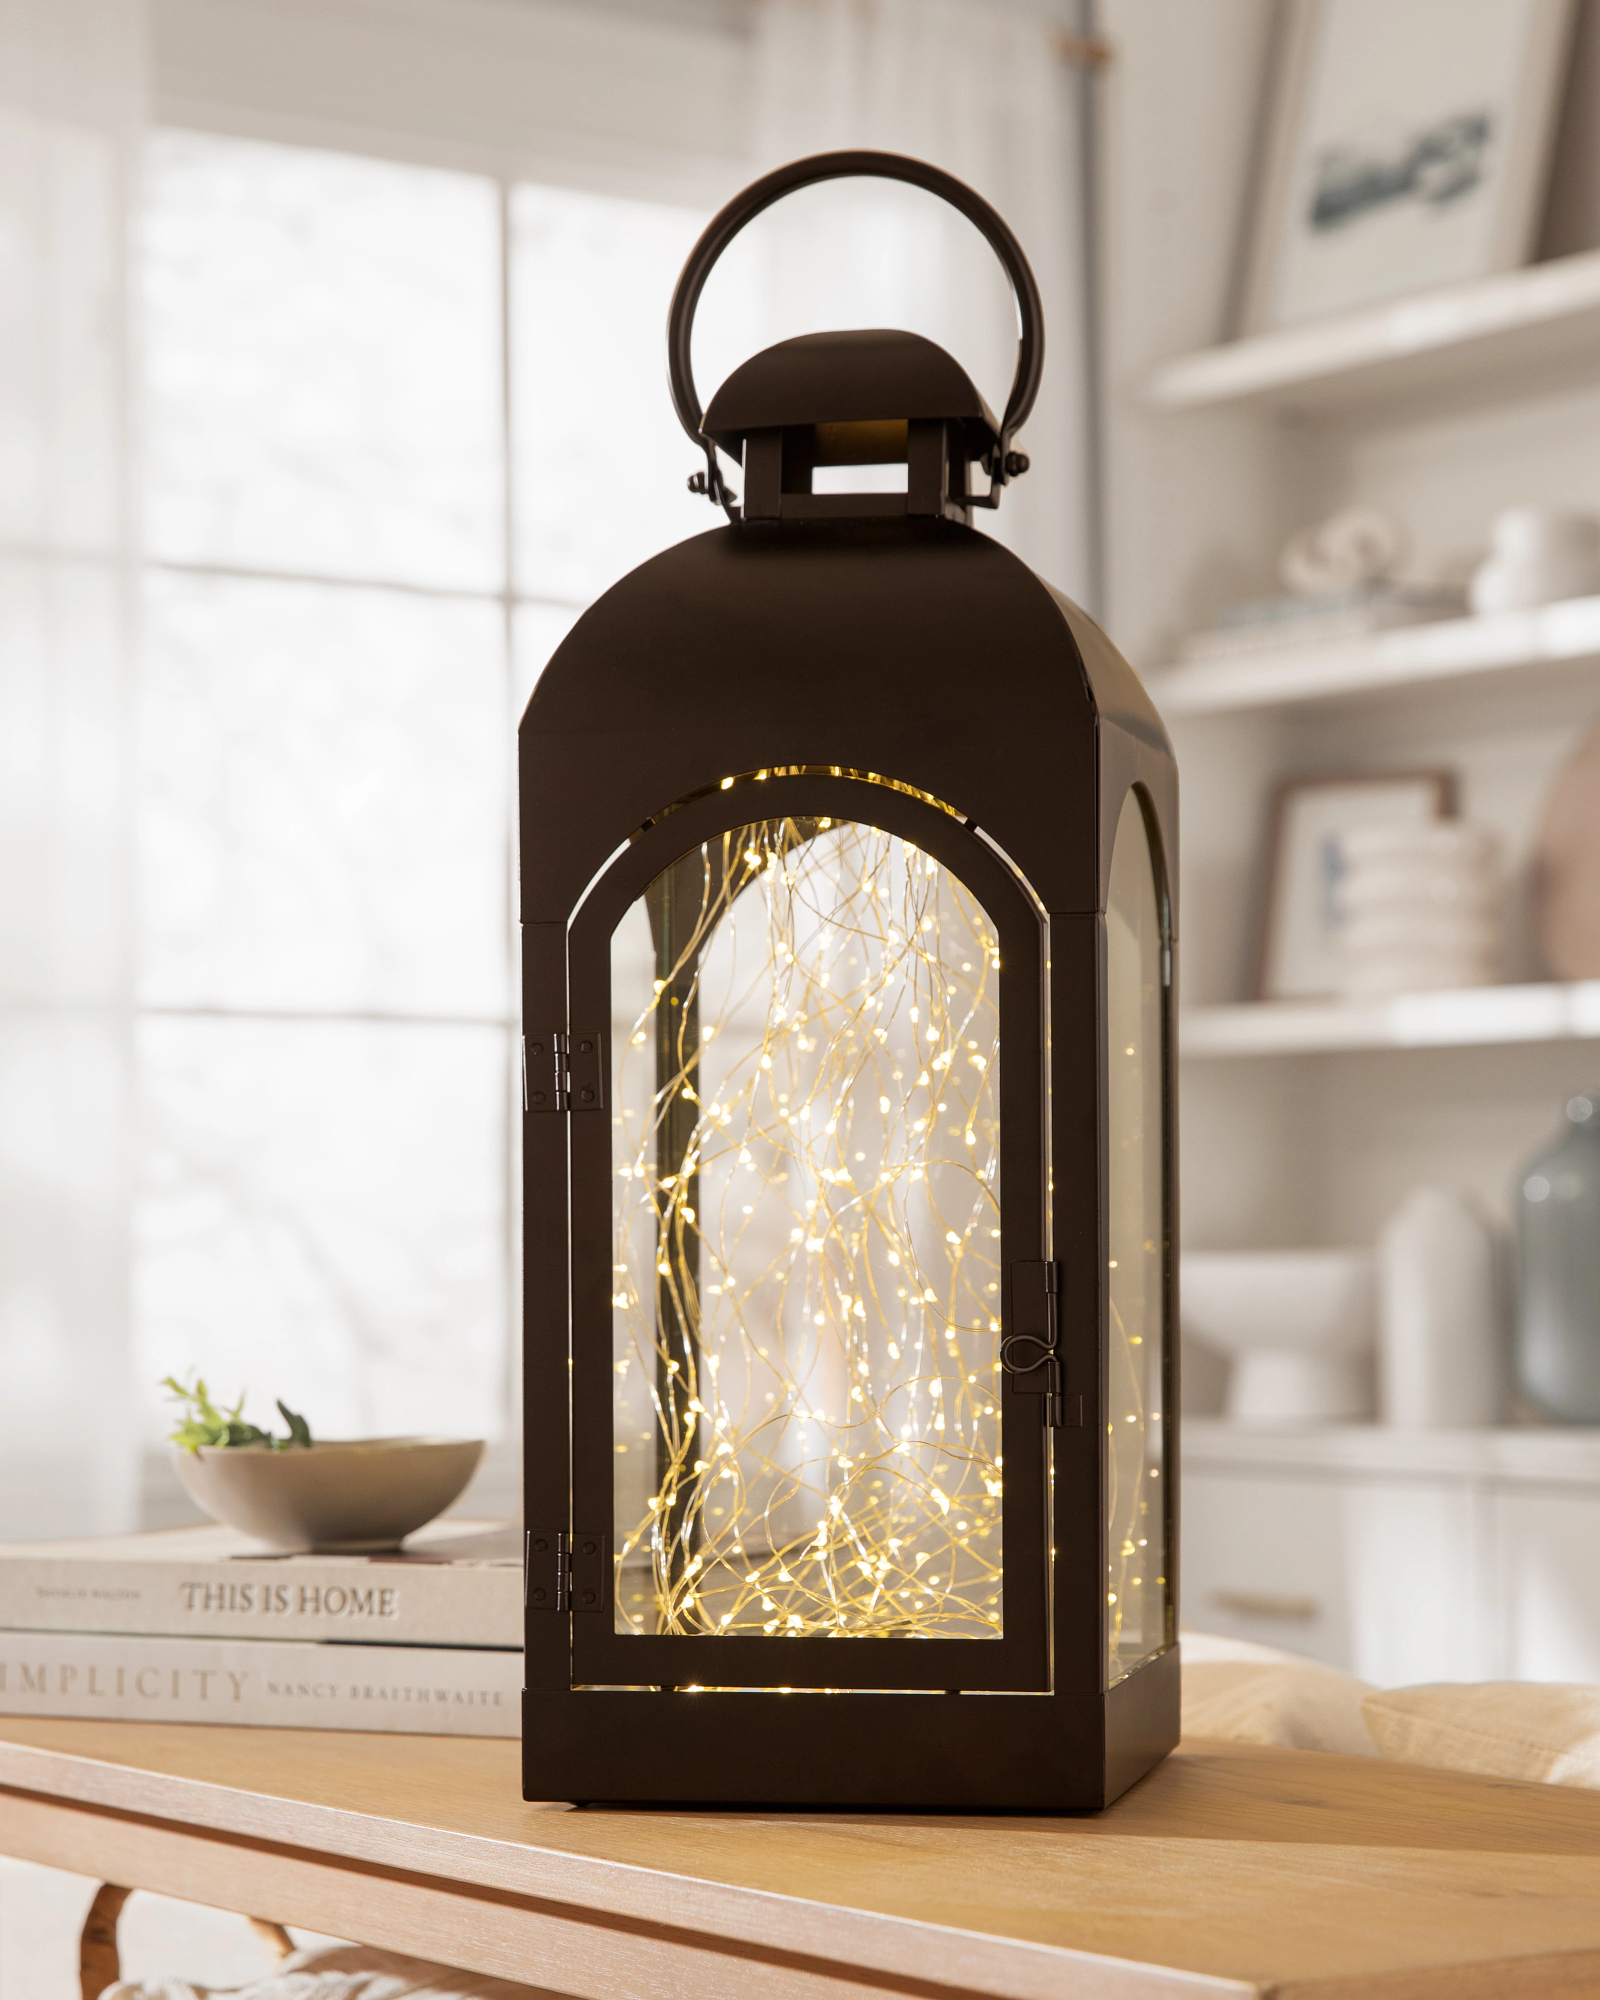 https://source.widen.net/content/nbwi810hsn/jpeg/CDL-2031004_Brown-Classic-Fairy-Light-Lantern-20in_SSC.jpeg?w=1600&h=2000&keep=c&crop=yes&color=cccccc&quality=100&u=7mzq6p